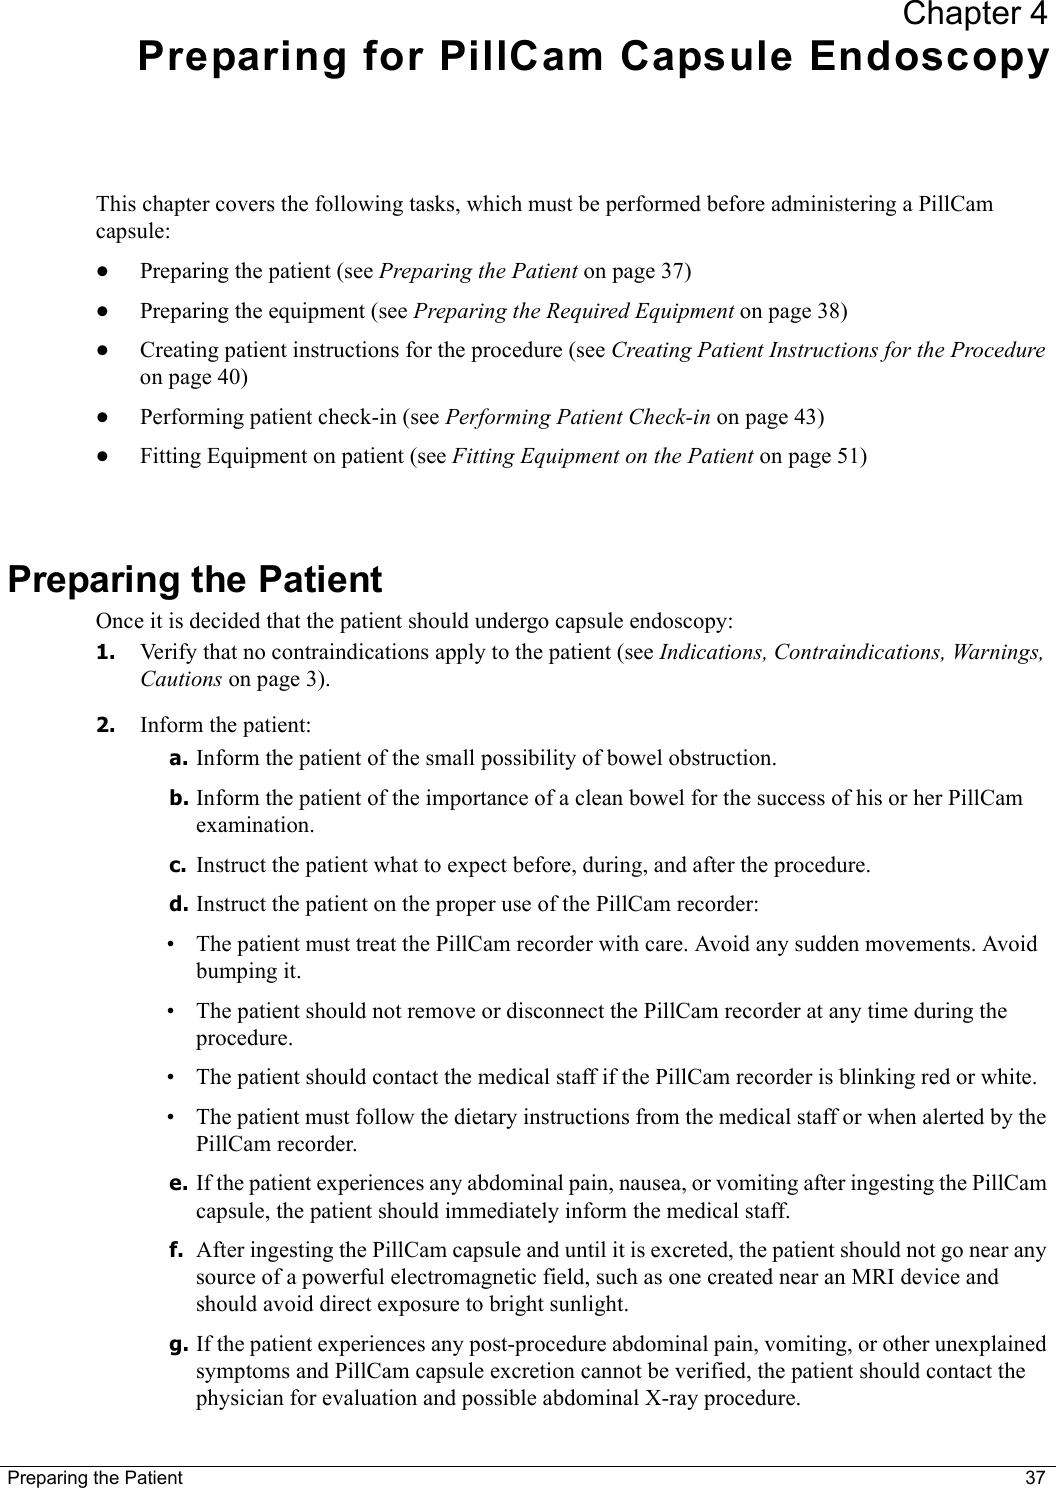 Preparing the Patient 37Chapter 4Preparing for PillCam Capsule EndoscopyThis chapter covers the following tasks, which must be performed before administering a PillCam capsule:•Preparing the patient (see Preparing the Patient on page 37)•Preparing the equipment (see Preparing the Required Equipment on page 38)•Creating patient instructions for the procedure (see Creating Patient Instructions for the Procedure on page 40)•Performing patient check-in (see Performing Patient Check-in on page 43)•Fitting Equipment on patient (see Fitting Equipment on the Patient on page 51)Preparing the PatientOnce it is decided that the patient should undergo capsule endoscopy:1. Verify that no contraindications apply to the patient (see Indications, Contraindications, Warnings, Cautions on page 3).2. Inform the patient:a. Inform the patient of the small possibility of bowel obstruction.b. Inform the patient of the importance of a clean bowel for the success of his or her PillCam examination.c. Instruct the patient what to expect before, during, and after the procedure.d. Instruct the patient on the proper use of the PillCam recorder:• The patient must treat the PillCam recorder with care. Avoid any sudden movements. Avoid bumping it.• The patient should not remove or disconnect the PillCam recorder at any time during the procedure.• The patient should contact the medical staff if the PillCam recorder is blinking red or white.• The patient must follow the dietary instructions from the medical staff or when alerted by the PillCam recorder. e. If the patient experiences any abdominal pain, nausea, or vomiting after ingesting the PillCam capsule, the patient should immediately inform the medical staff.f. After ingesting the PillCam capsule and until it is excreted, the patient should not go near any source of a powerful electromagnetic field, such as one created near an MRI device and should avoid direct exposure to bright sunlight.g. If the patient experiences any post-procedure abdominal pain, vomiting, or other unexplained symptoms and PillCam capsule excretion cannot be verified, the patient should contact the physician for evaluation and possible abdominal X-ray procedure.